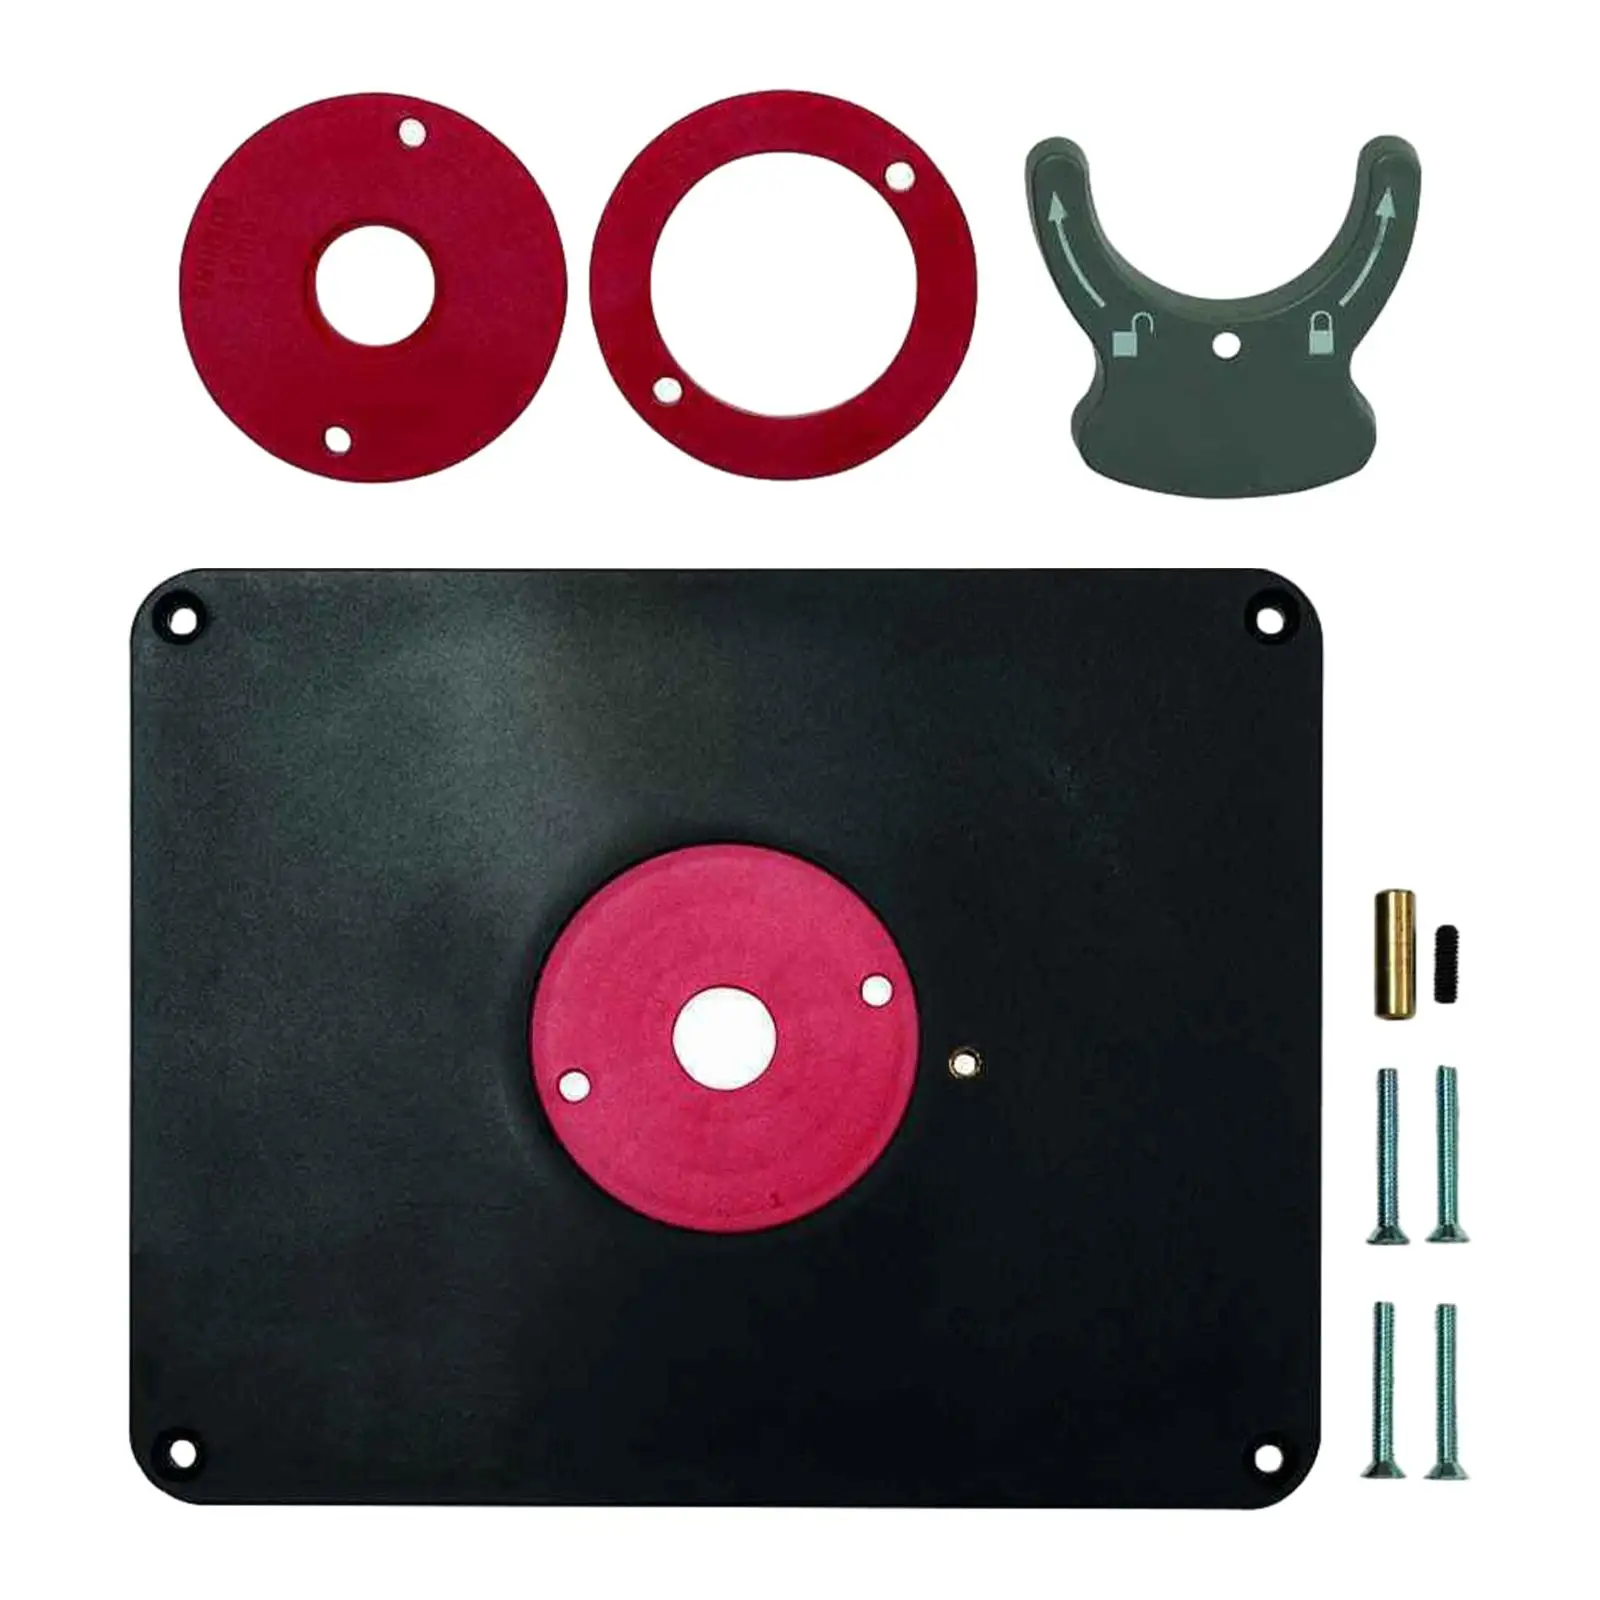 Router Template with Rings 3/8 inch Thick Milling Table Insert Plate Router Insert Plate for Carpenters Craftsmen Woodworking